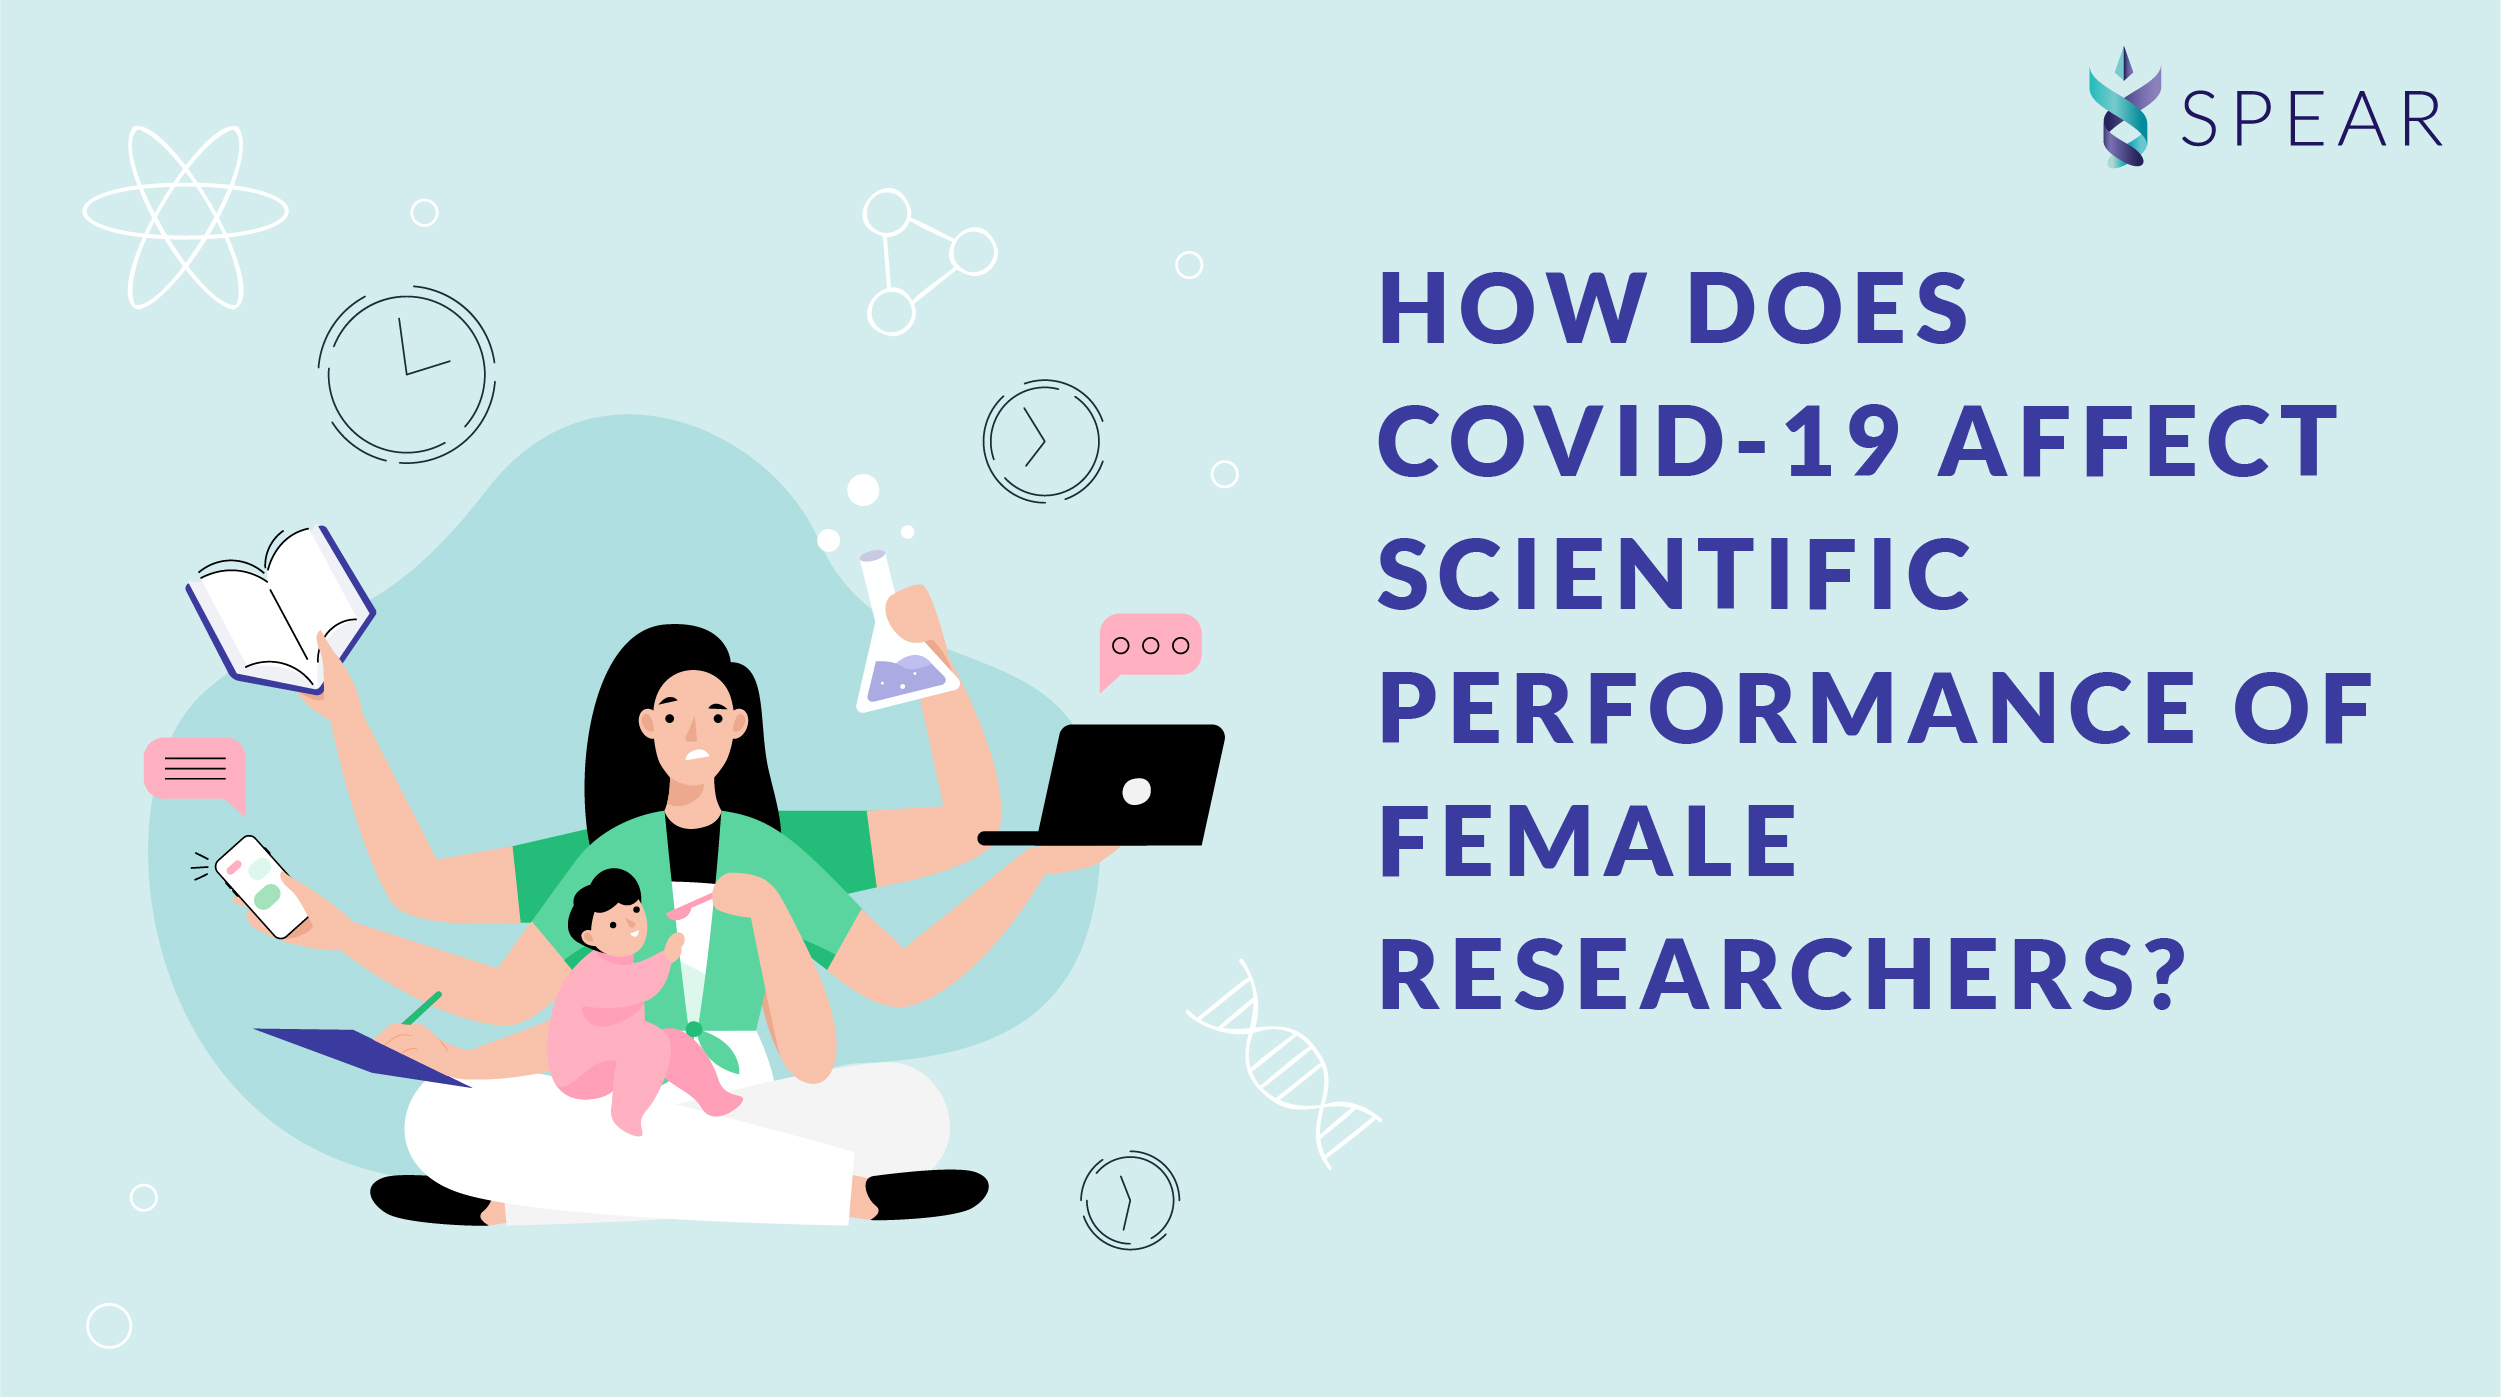 How does COVID-19 affect scientific performance of female researchers?